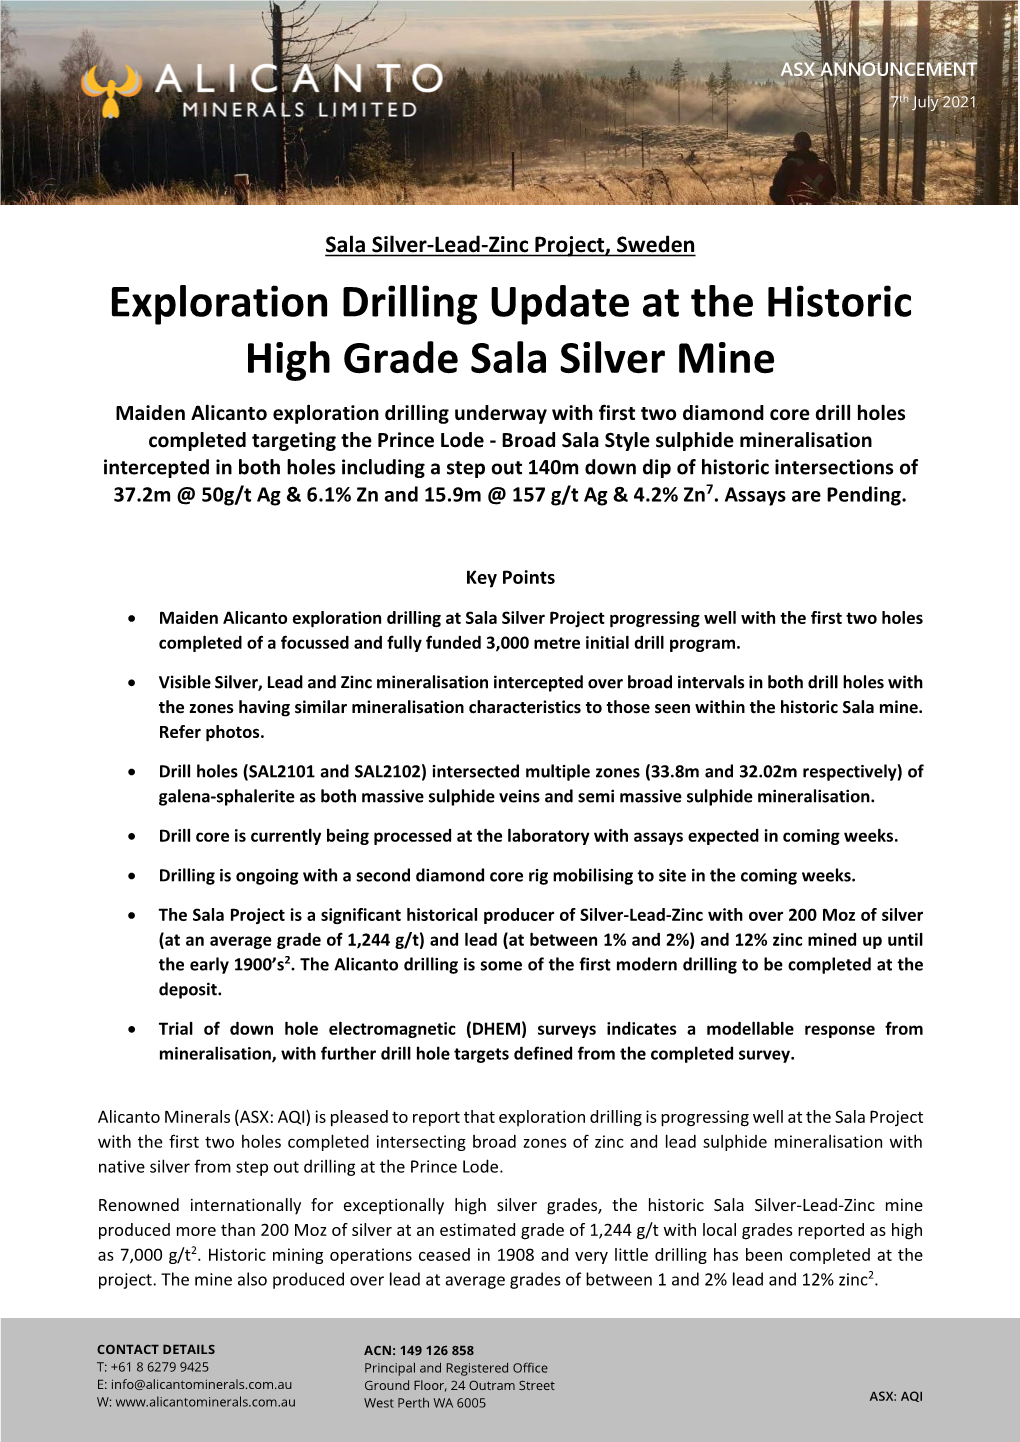 Exploration Drilling Update at the Historic High Grade Sala Silver Mine